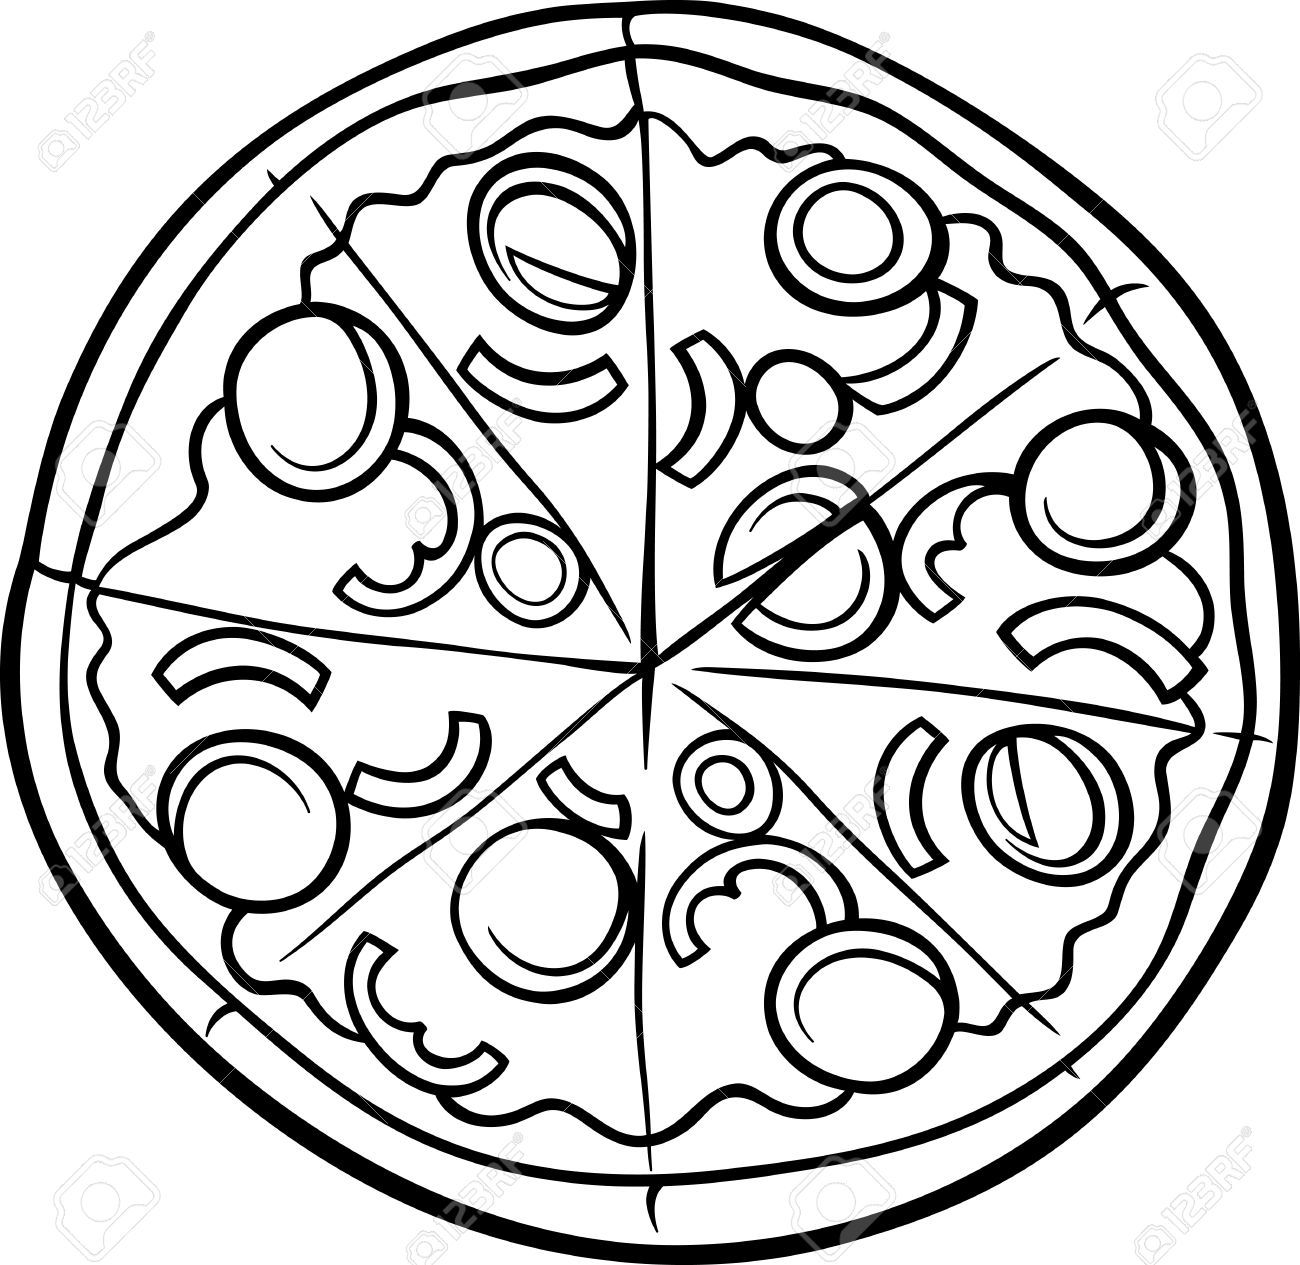 Free Clip art of Pizza Clipart Black and White